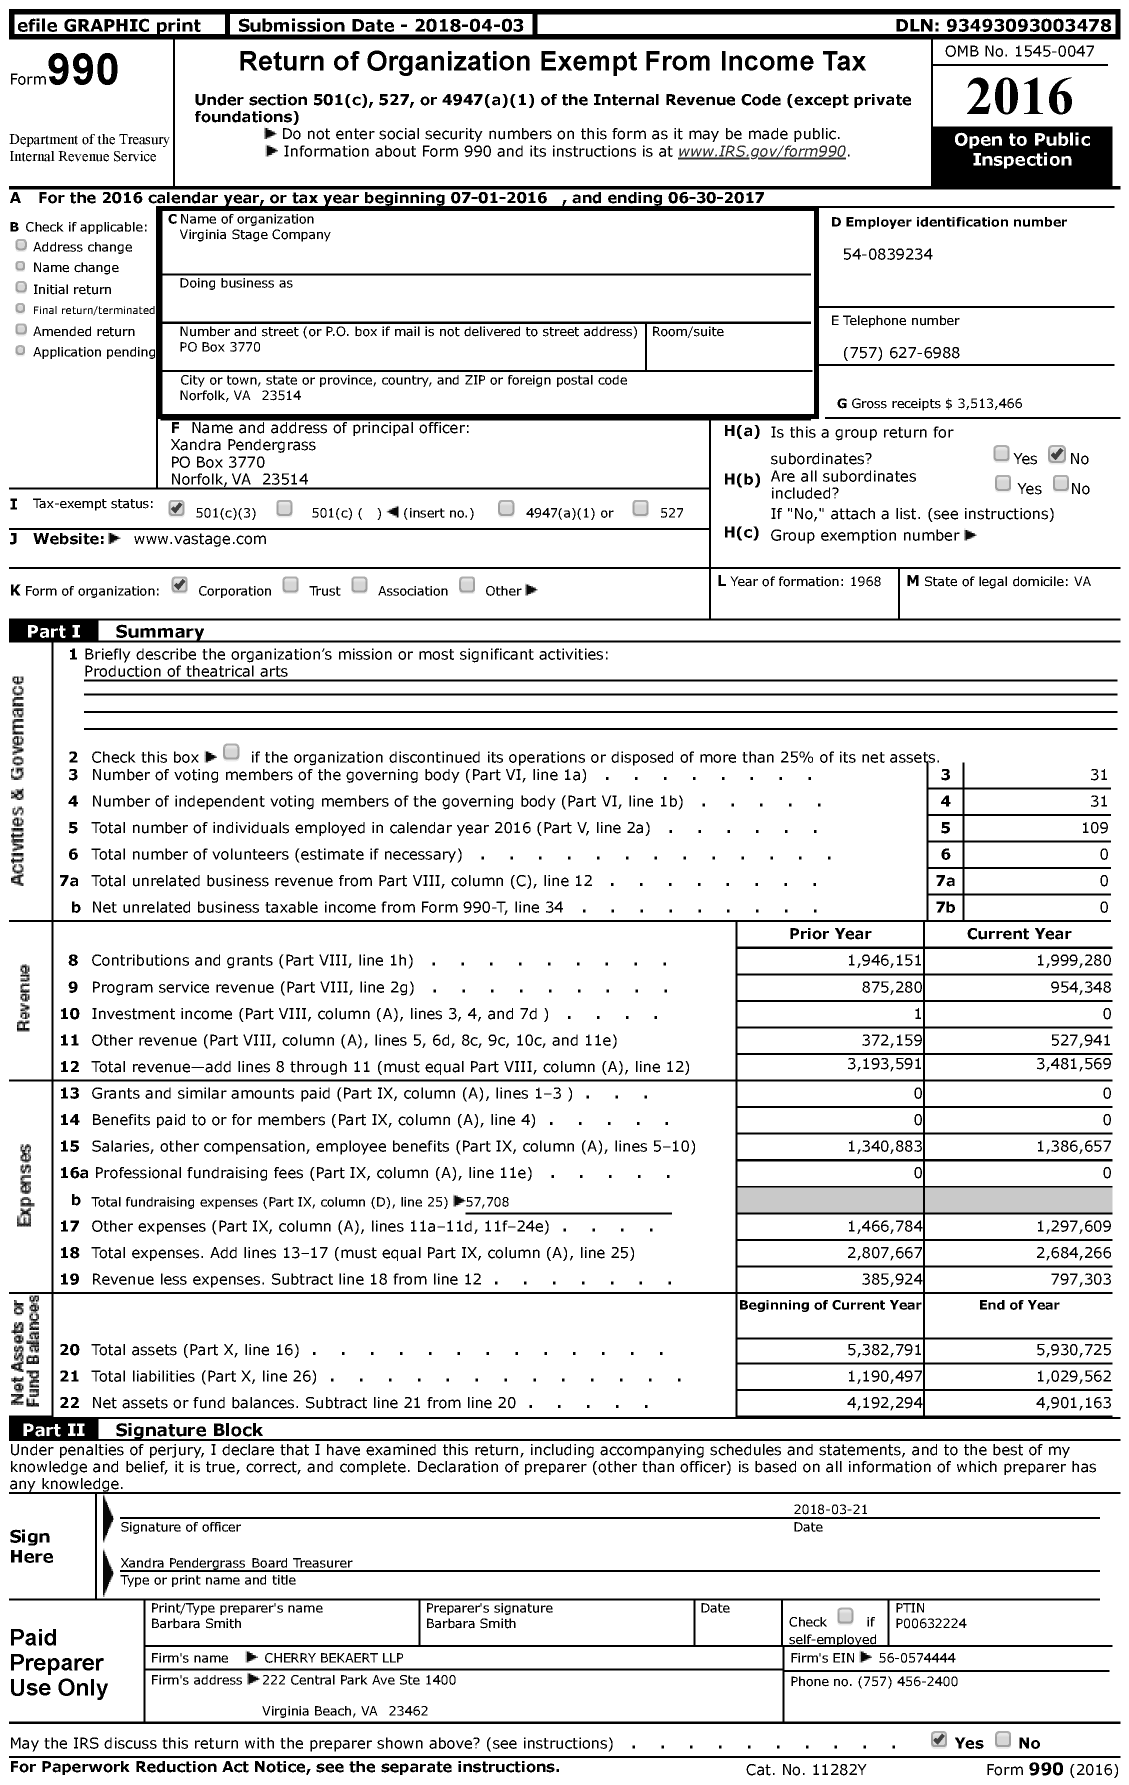 Image of first page of 2016 Form 990 for Virginia Stage Company (VSC)